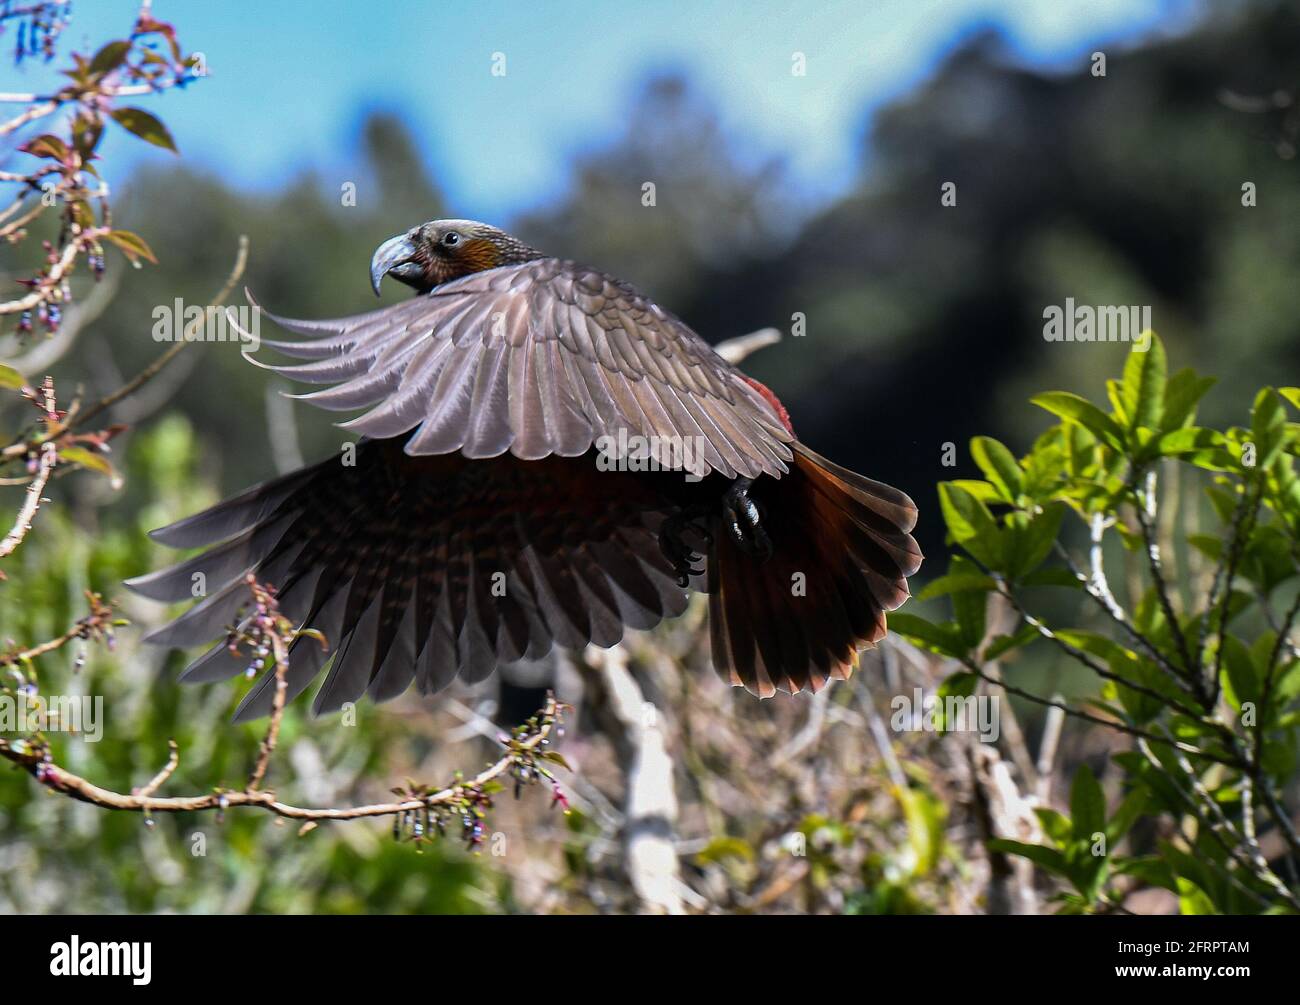 Wellington. 9th Sep, 2020. File photo taken on Sept. 9, 2020 shows a kaka, a native bird to New Zealand at Zealandia Eco-sanctuary in Wellington, New Zealand. In the 1990s, kaka, a native bird to New Zealand, was considered nearly extinct in the main islands of the country. However, Zealandia Eco-sanctuary witnessed more than 1,000 kaka chicks tagged in the past 20 years due to conservation efforts of a re-introduction program.TO GO WITH 'Feature: Zealandia, once a deserted dam in New Zealand, now an asylum for native birds' Credit: Guo Lei/Xinhua/Alamy Live News Stock Photo